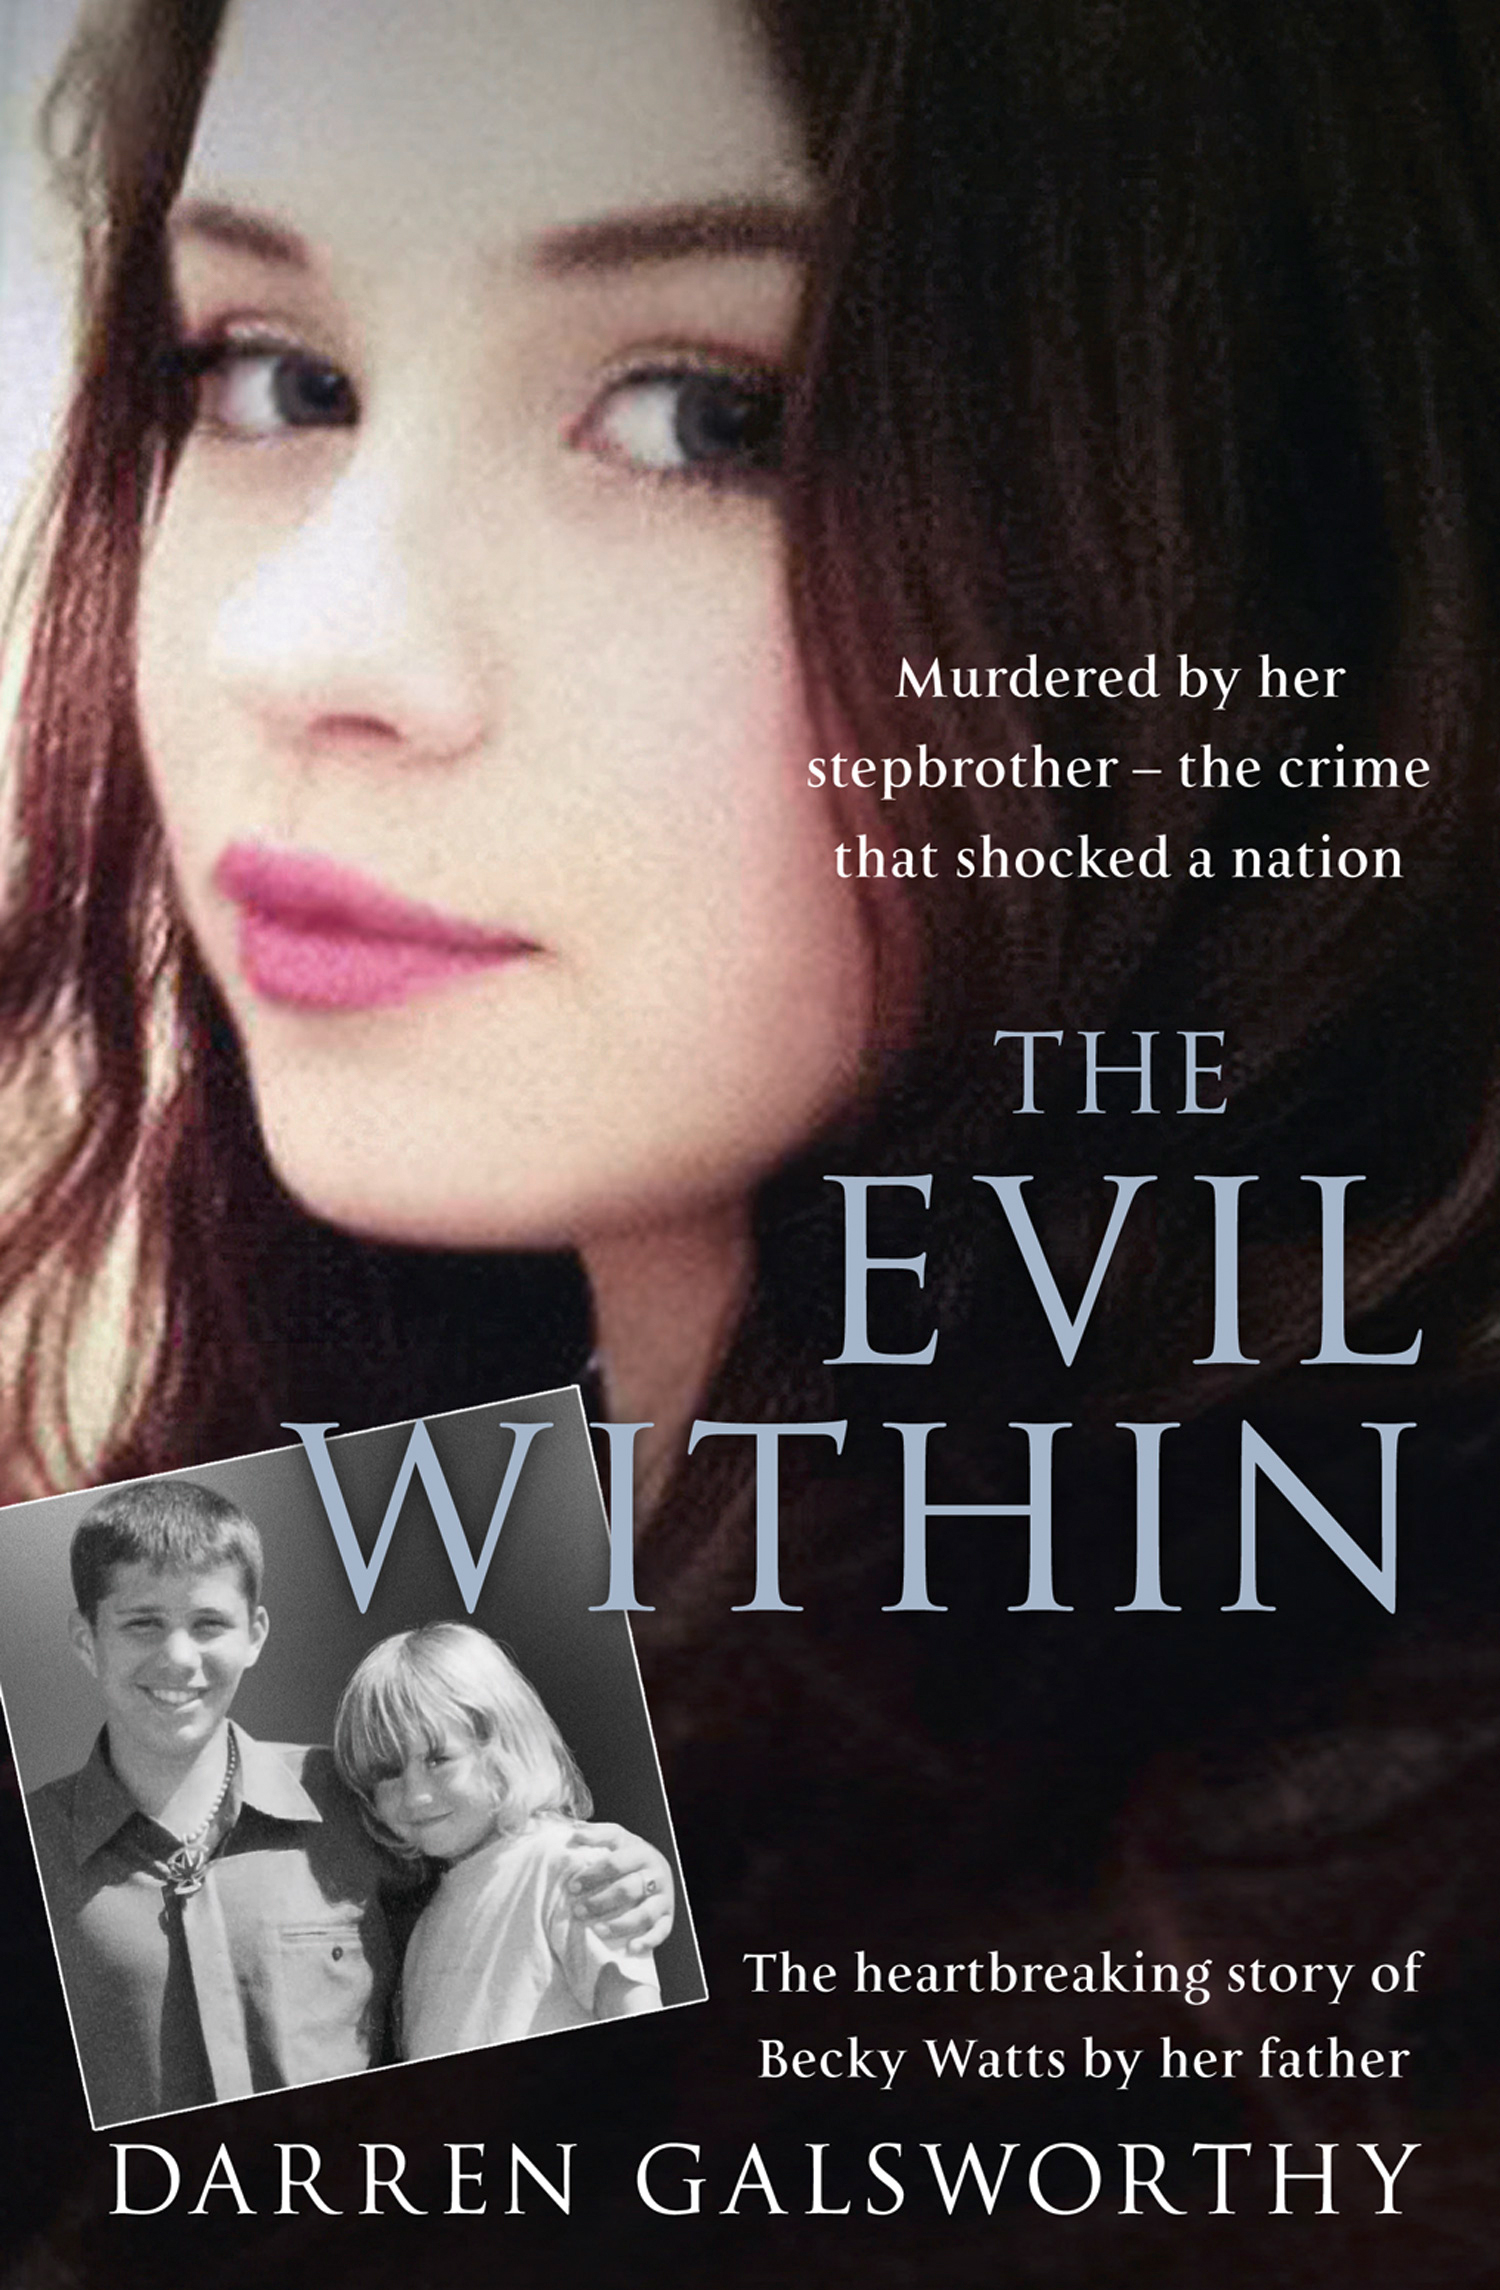 The Evil Within: Murdered by her stepbrother– the crime that shocked a nation. The heartbreaking story of Becky Watts by her father